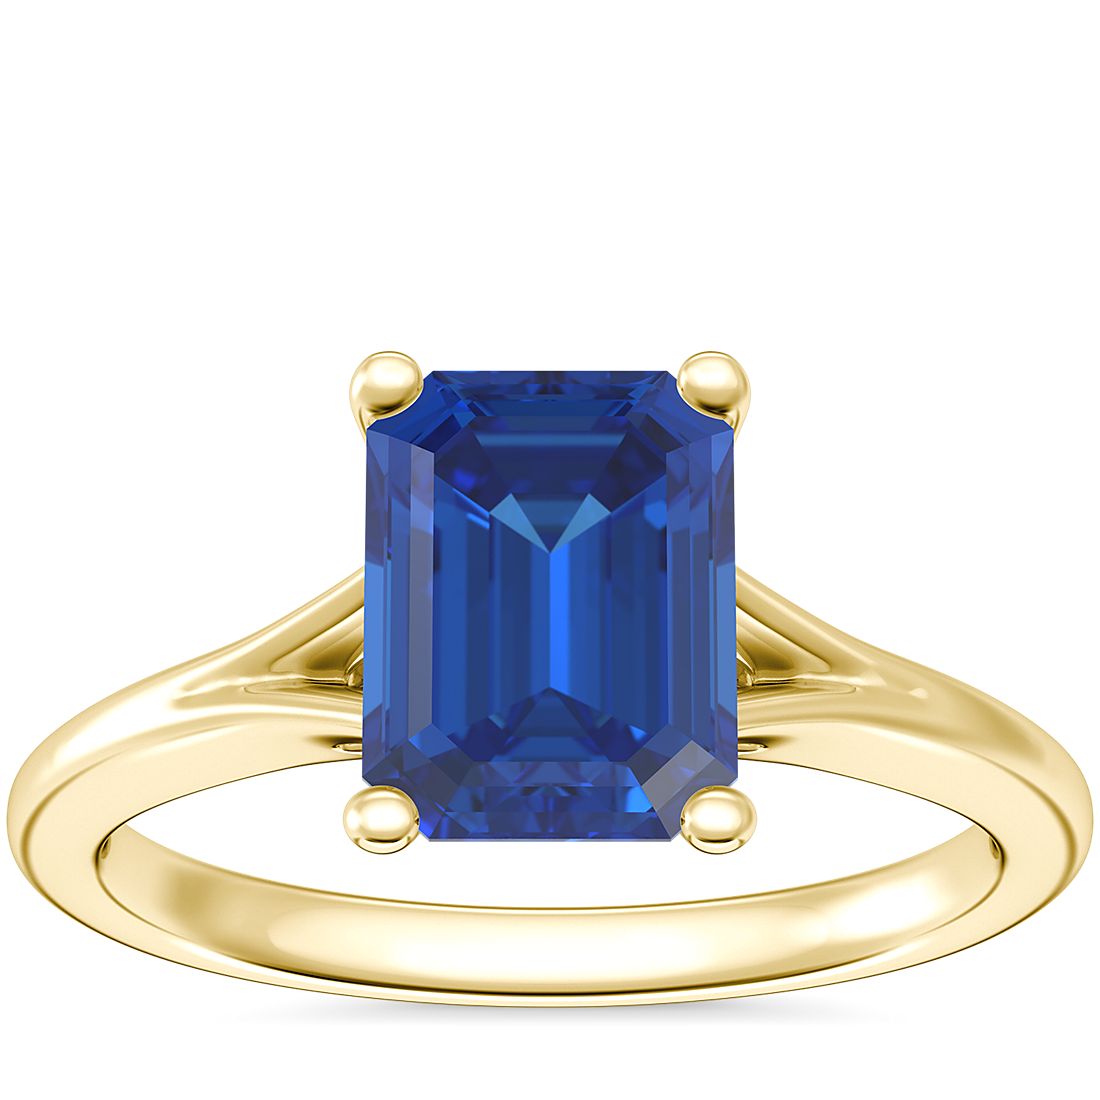 Petite Split Shank Solitaire Engagement Ring with Emerald-Cut Sapphire in 14k Yellow Gold (8x6mm)